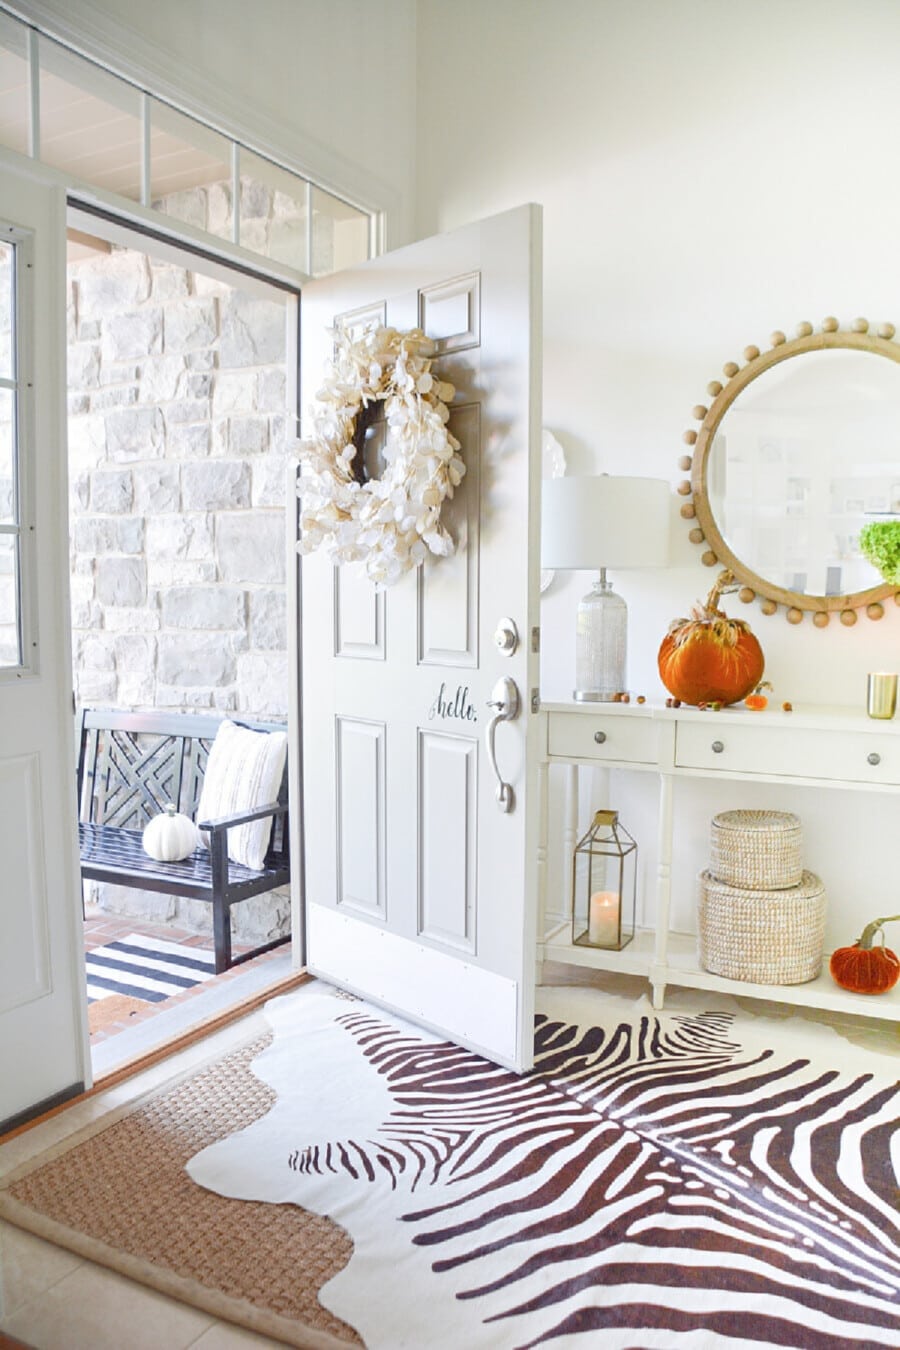 100+ Inspiring Fall Ideas, More Fall Decorating, Applesauce Bread Recipe, And the Rule Of Three